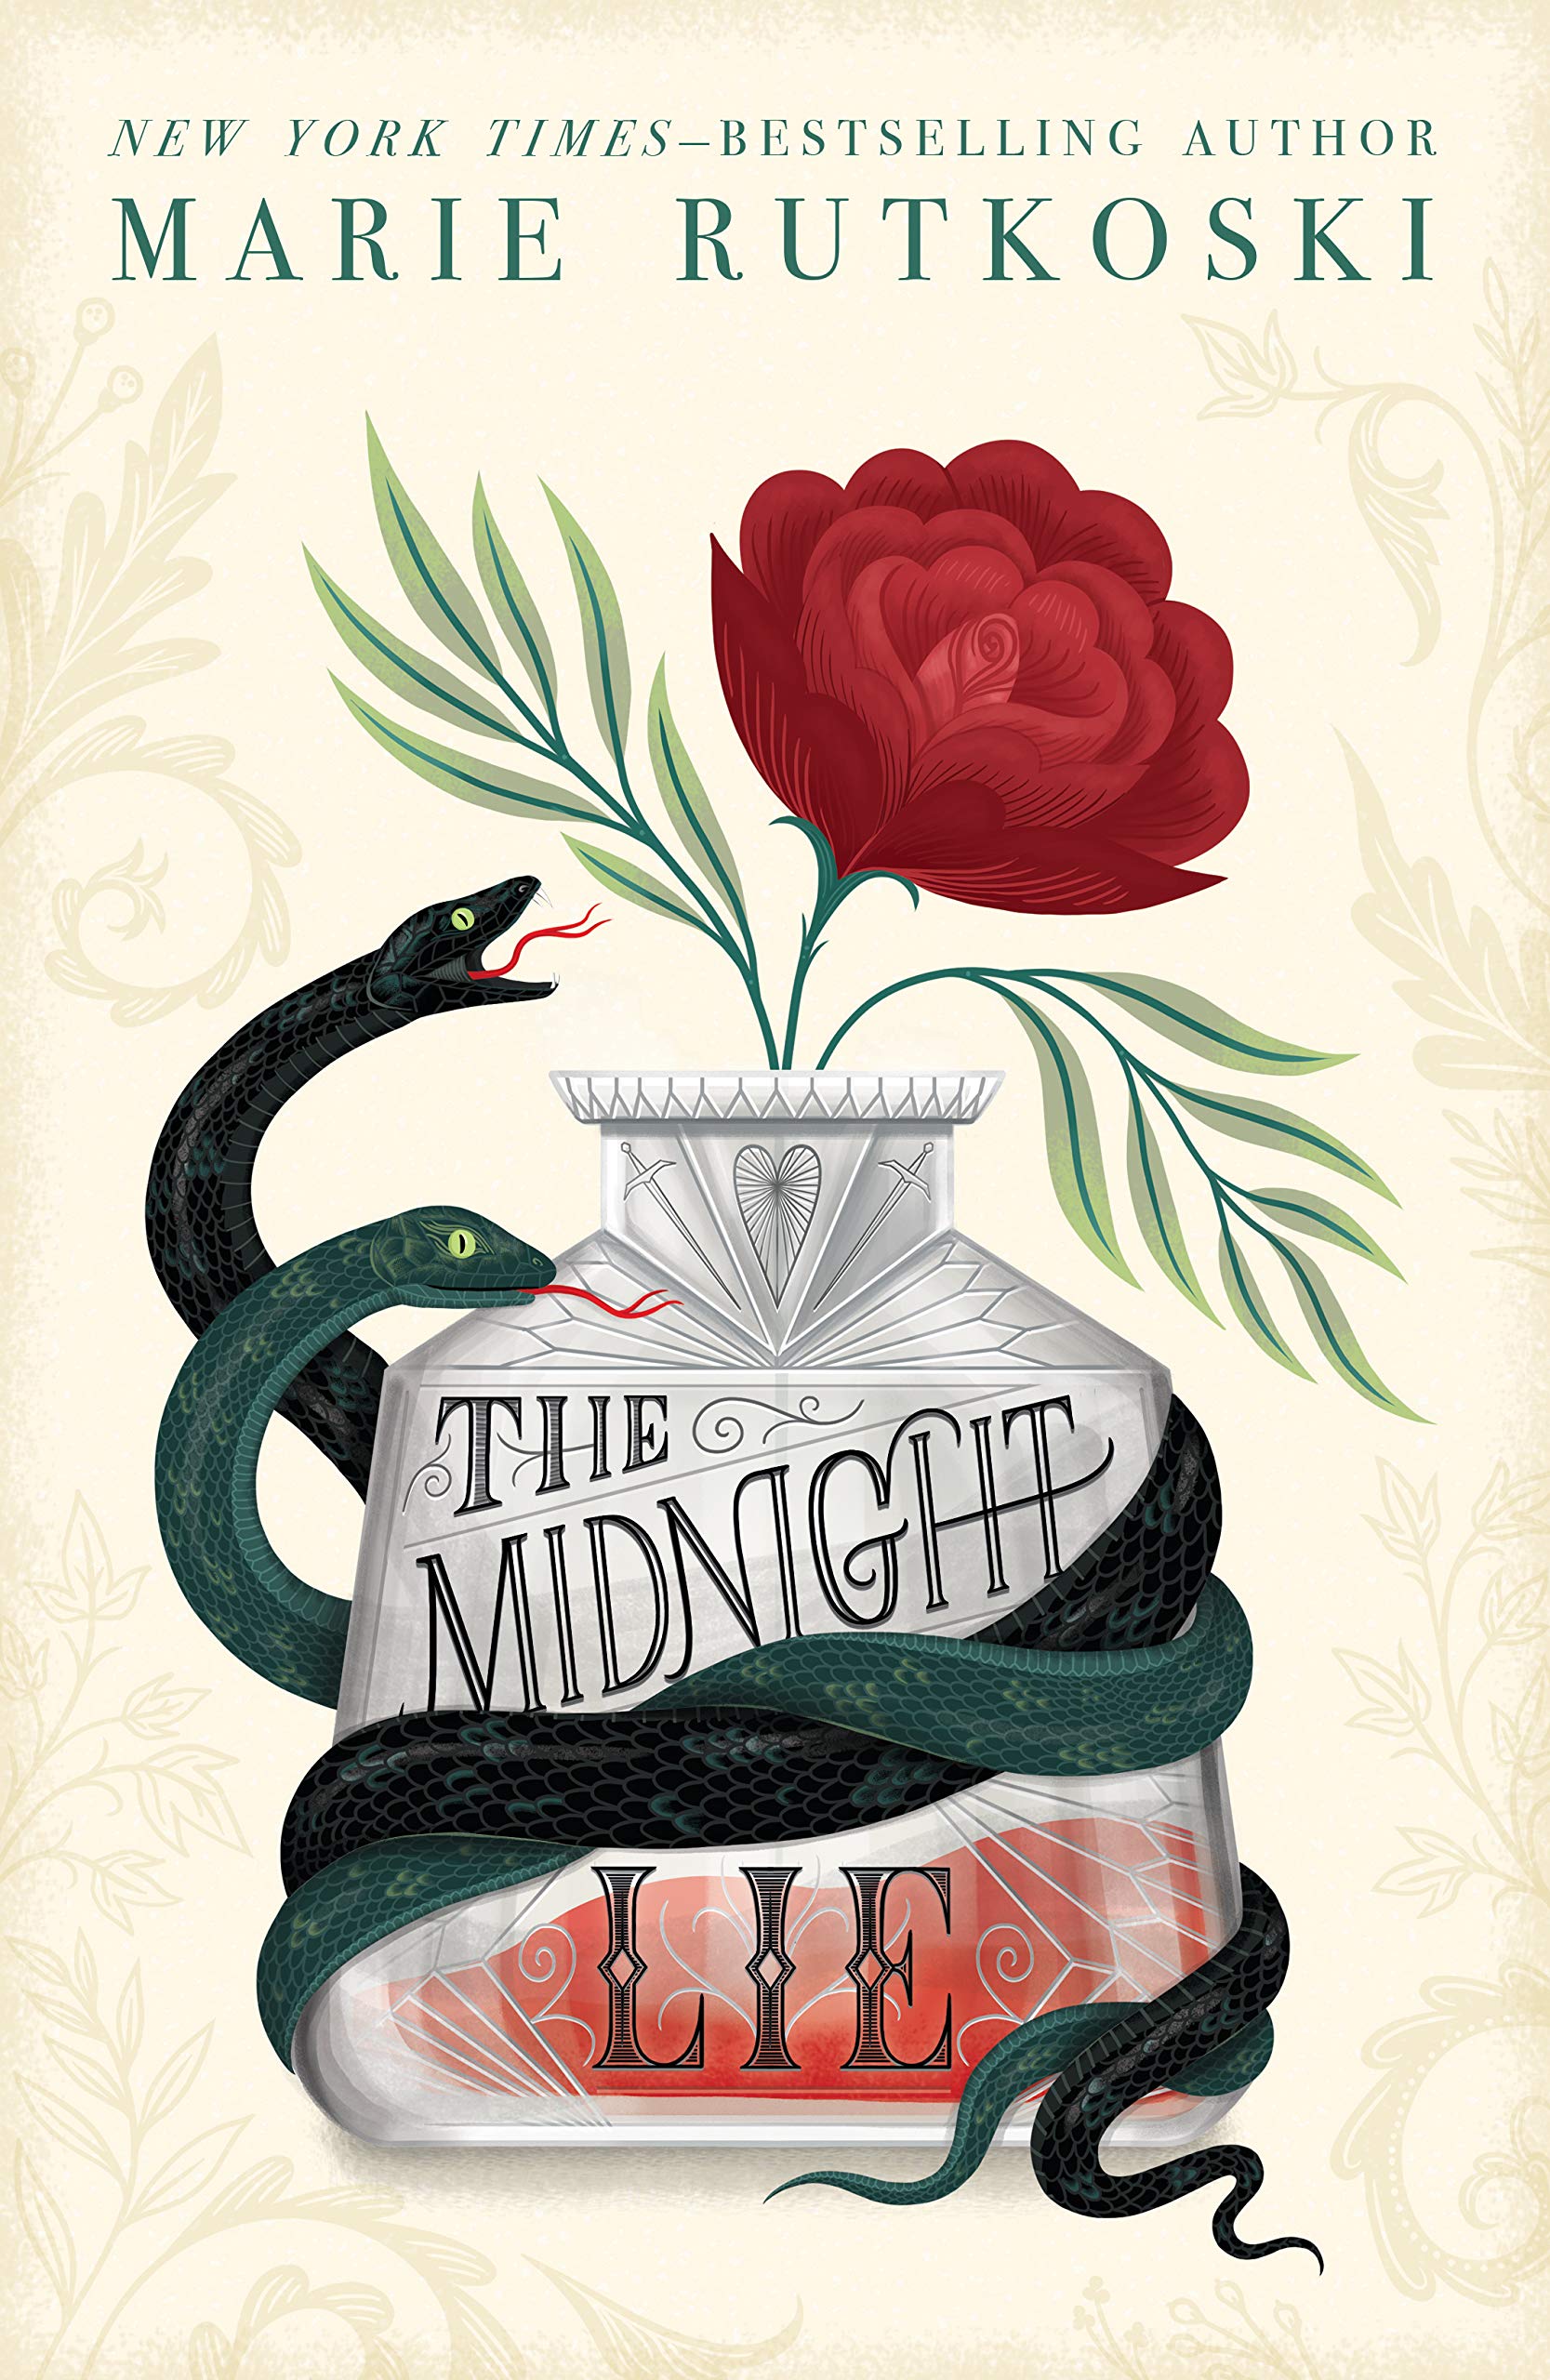 When Does The Midnight Lie - Novel By Marie Rutkoski Come Out? 2020 YA LGBT Fantasy Releases